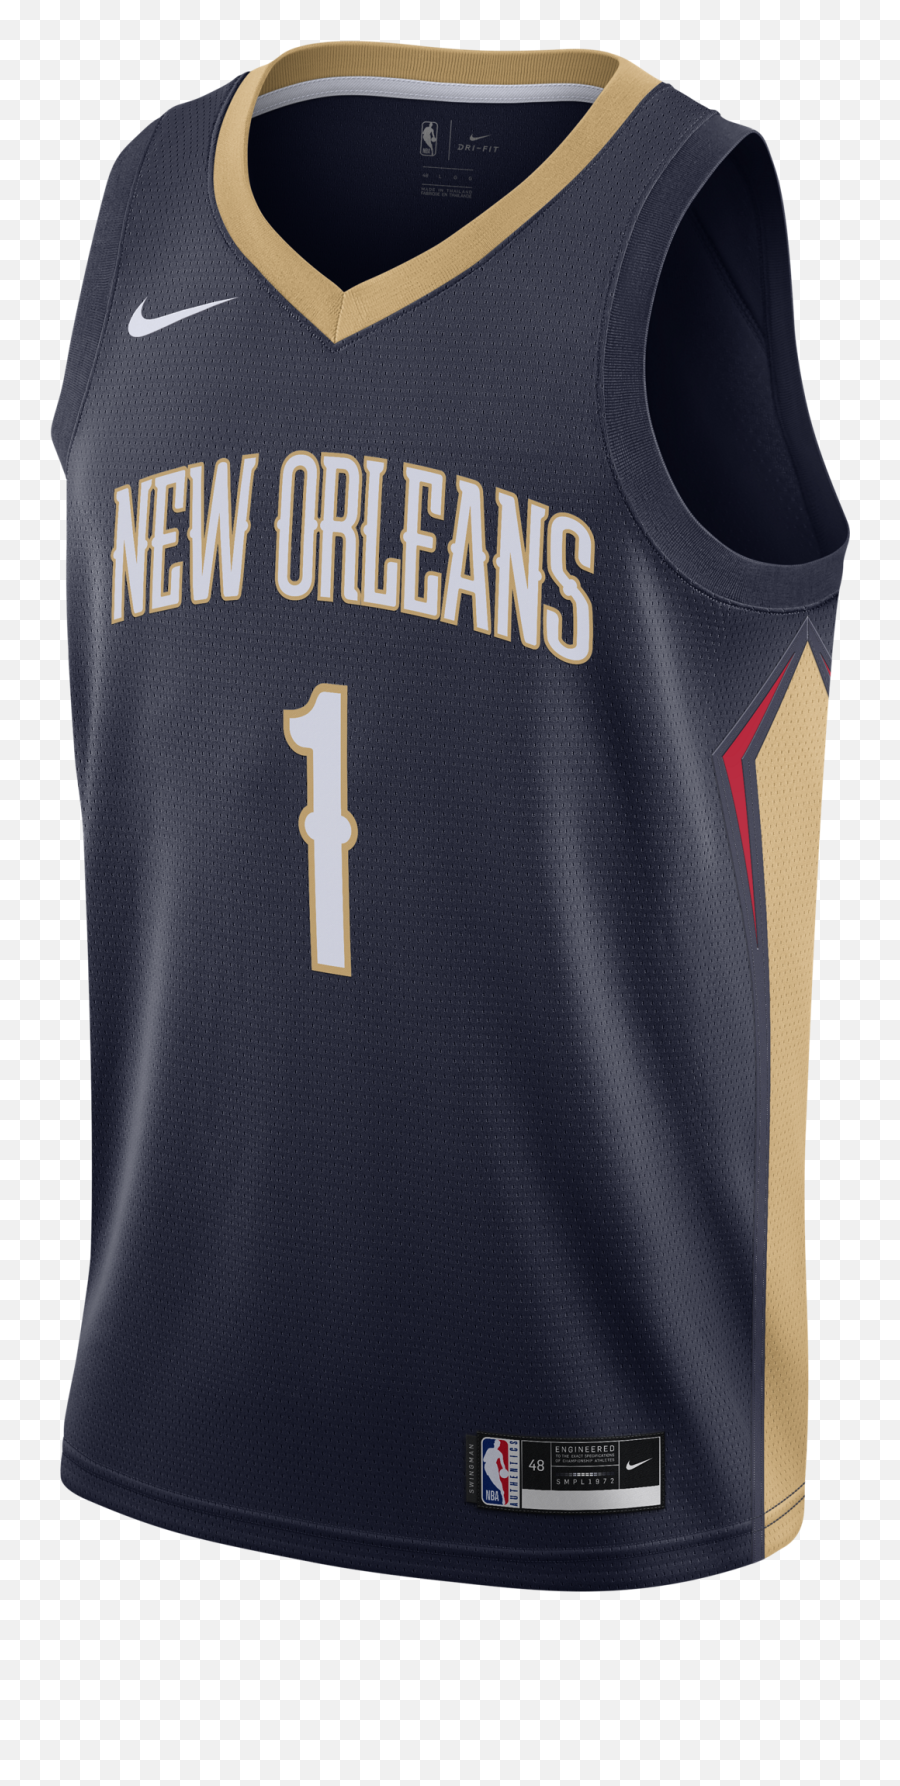 Nike Nba New Orleans Pelicans Icon Edition Swingman Jersey - New Orleans Pelicans Jersey Png,Fiba Icon